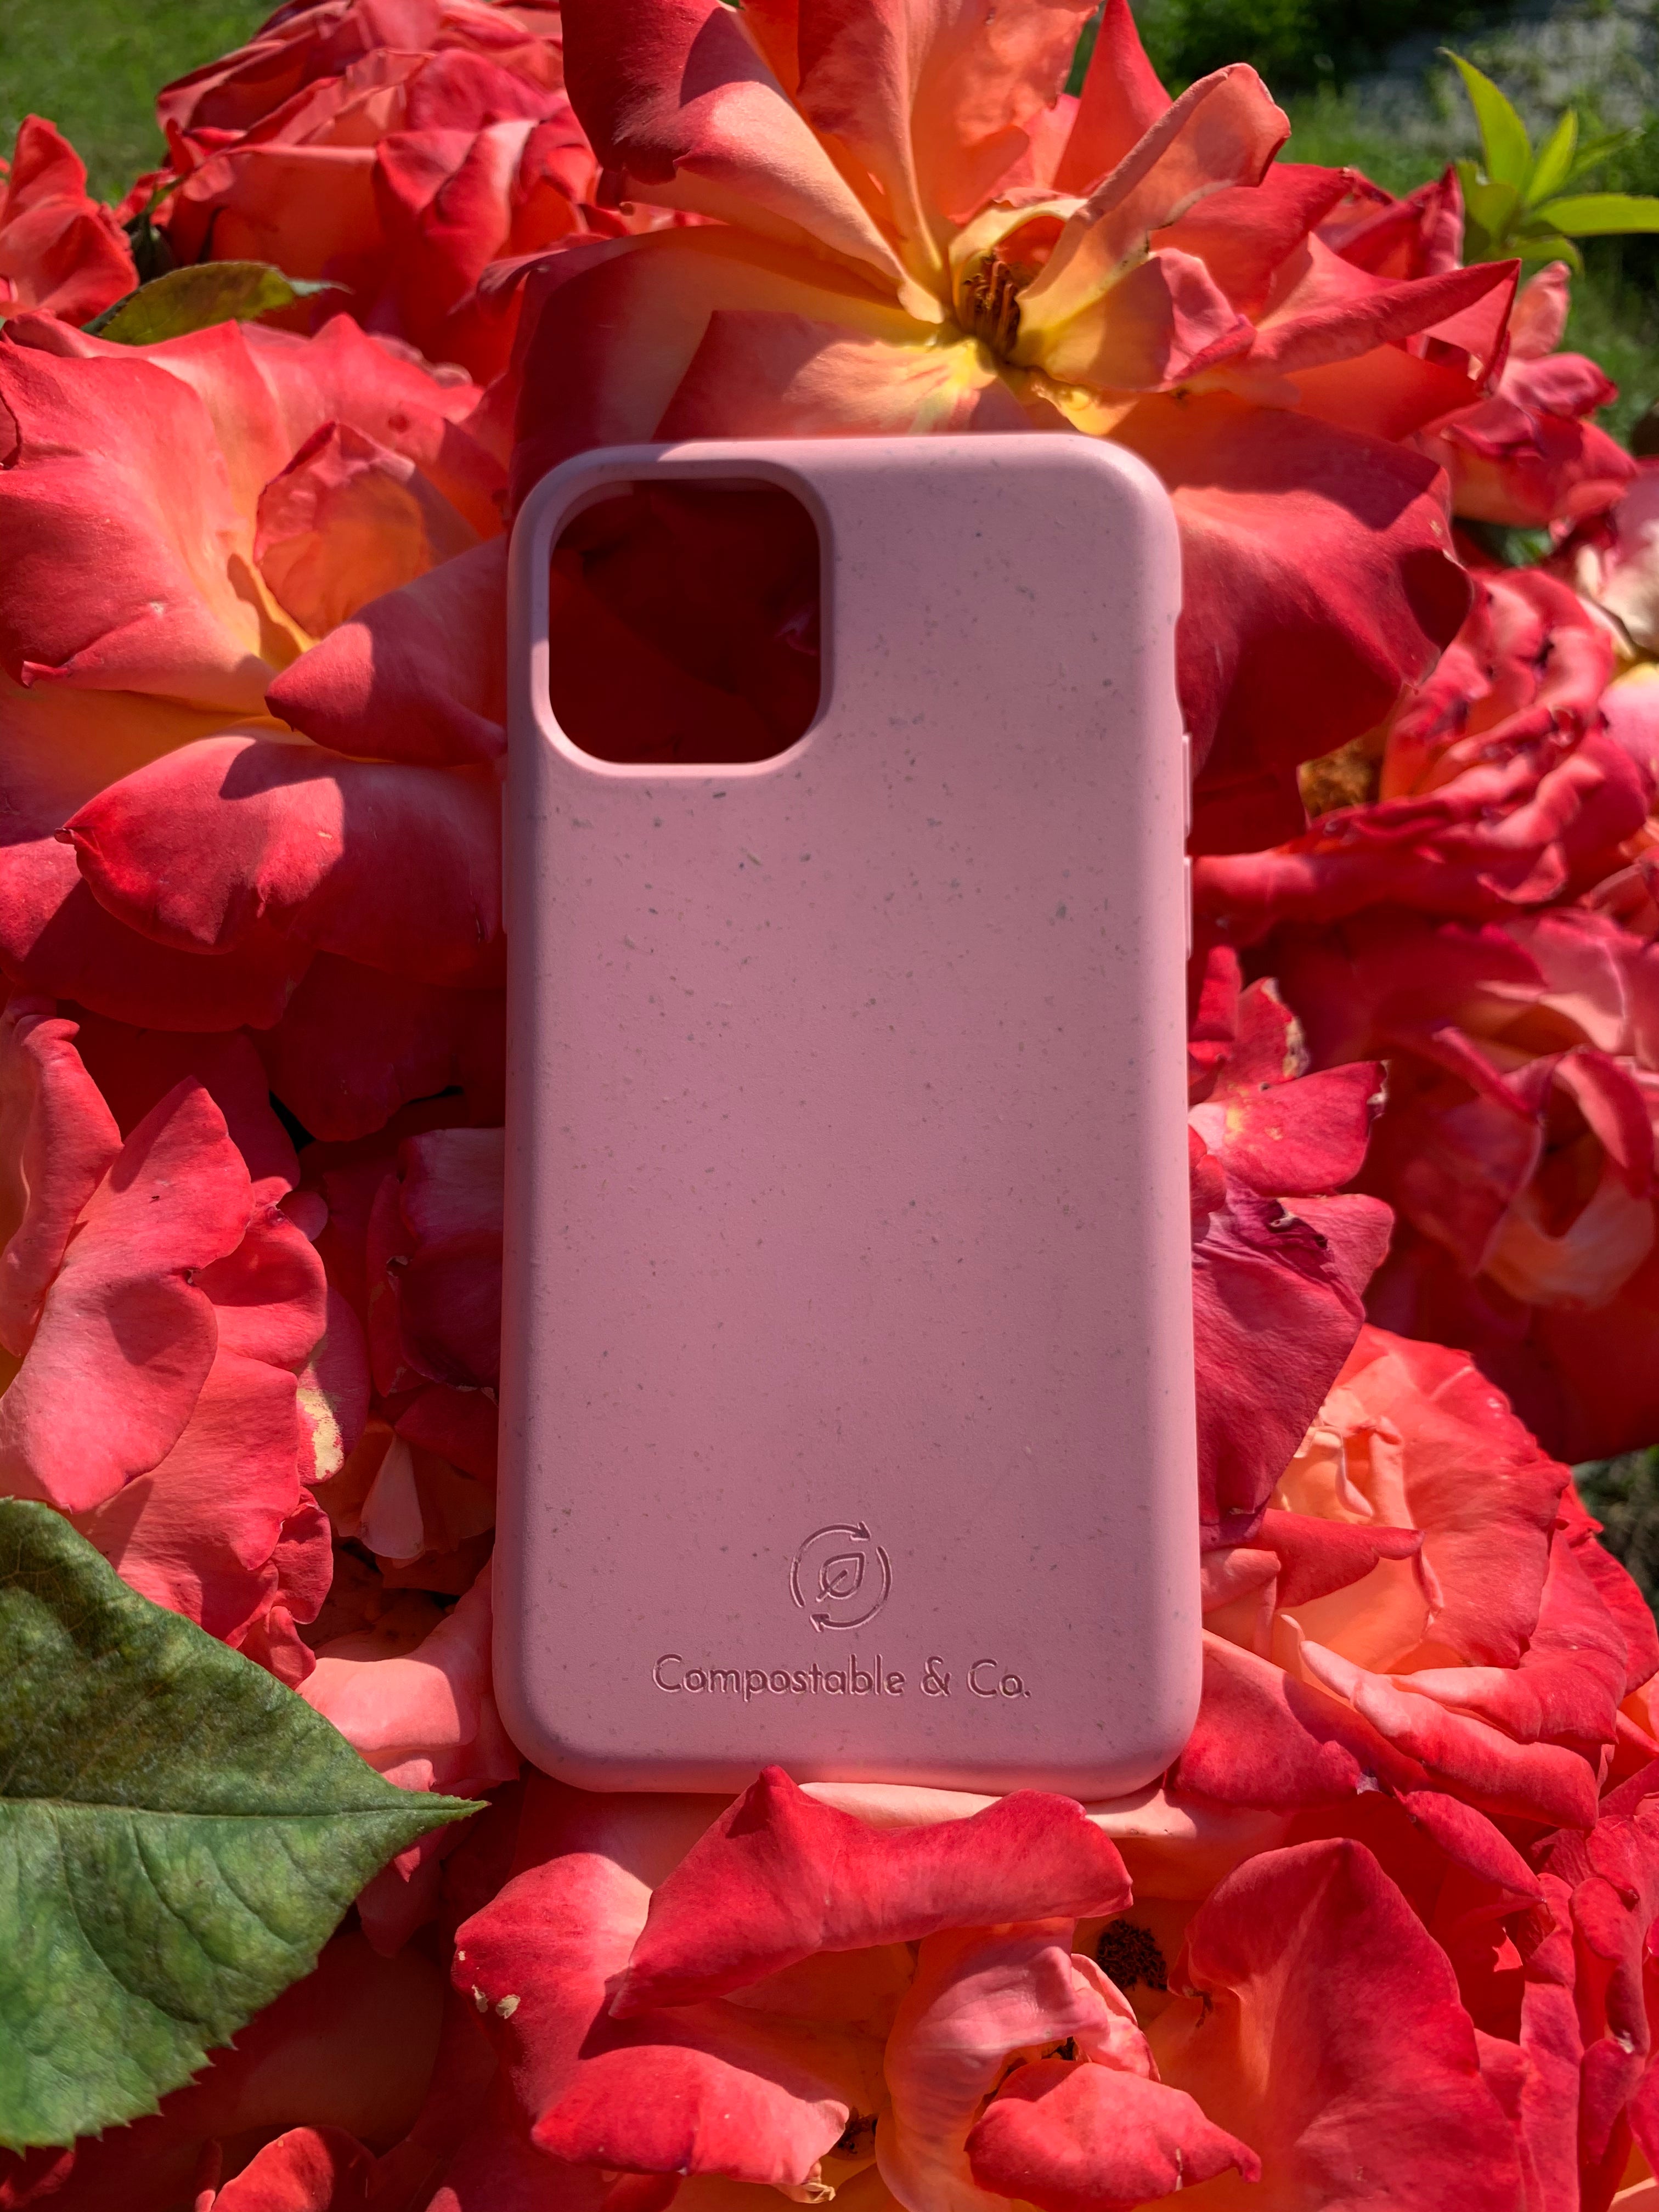 Compostable & Co. iPhone 11 pro max rose biodegradable phone case with roses